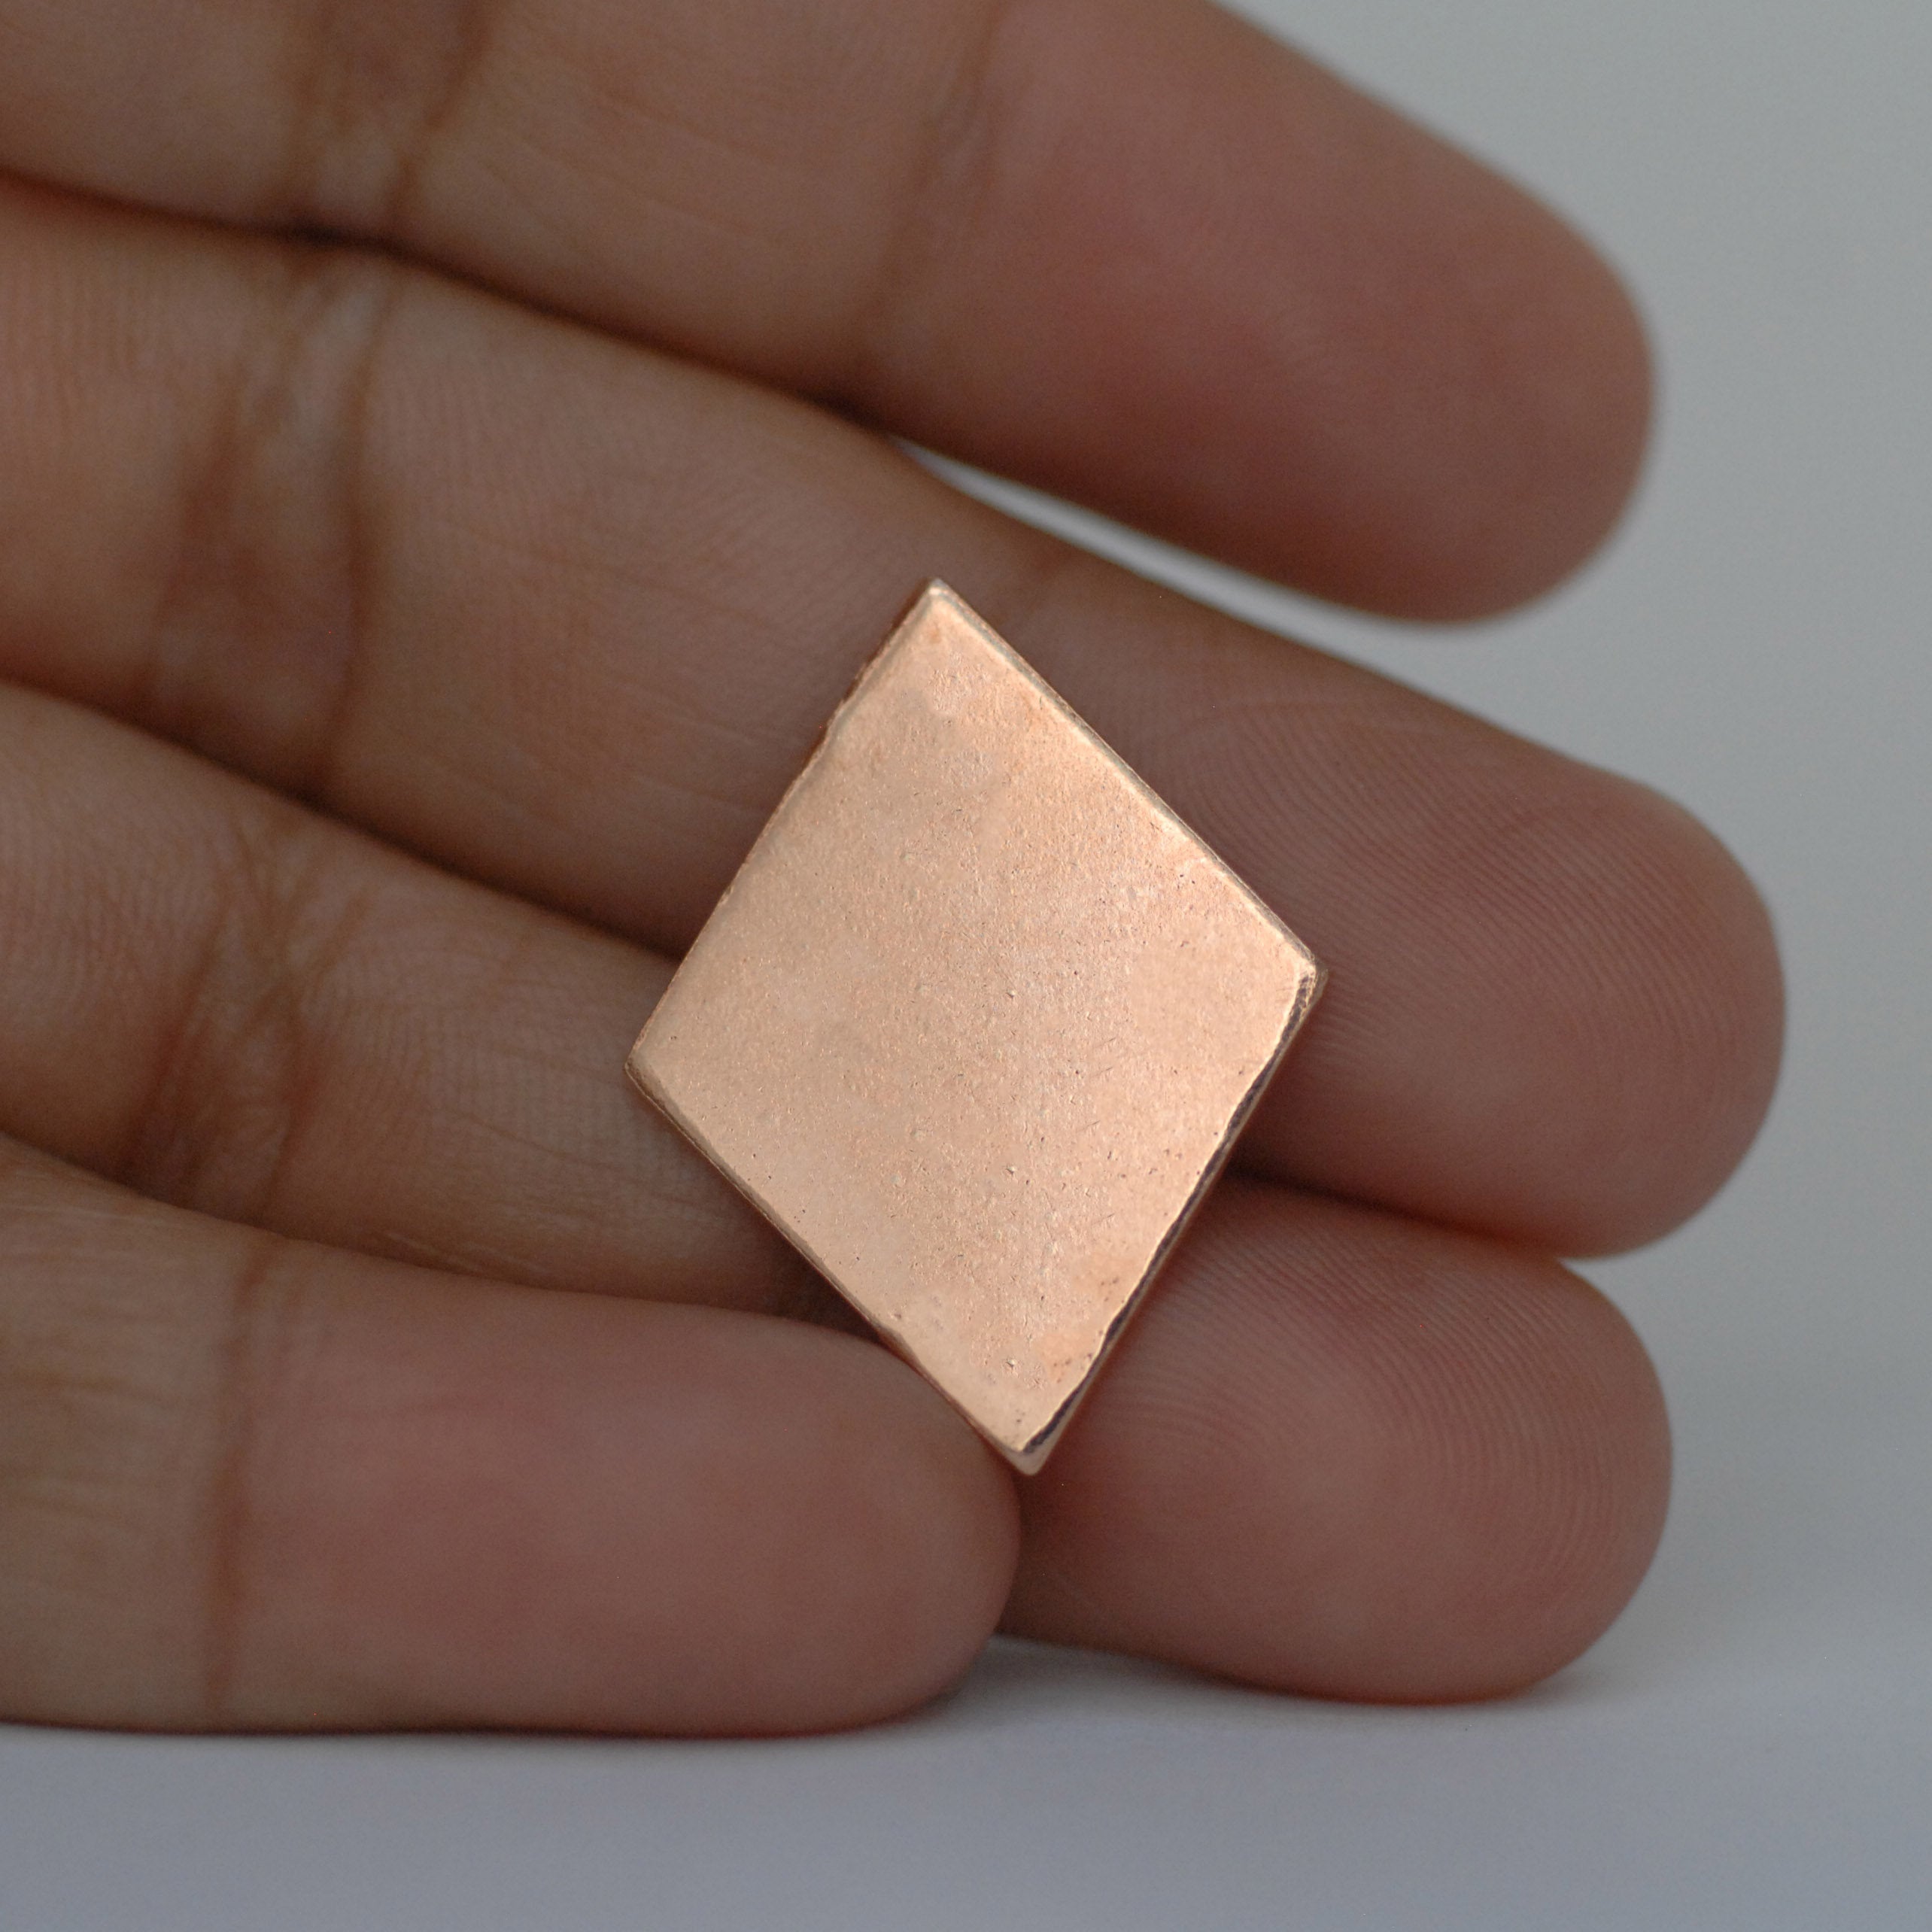 Wide Diamond shapes 25mm x 20mm metal blanks for making jewelry 24g 22g 20g copper, brass, bronze, nickel silver